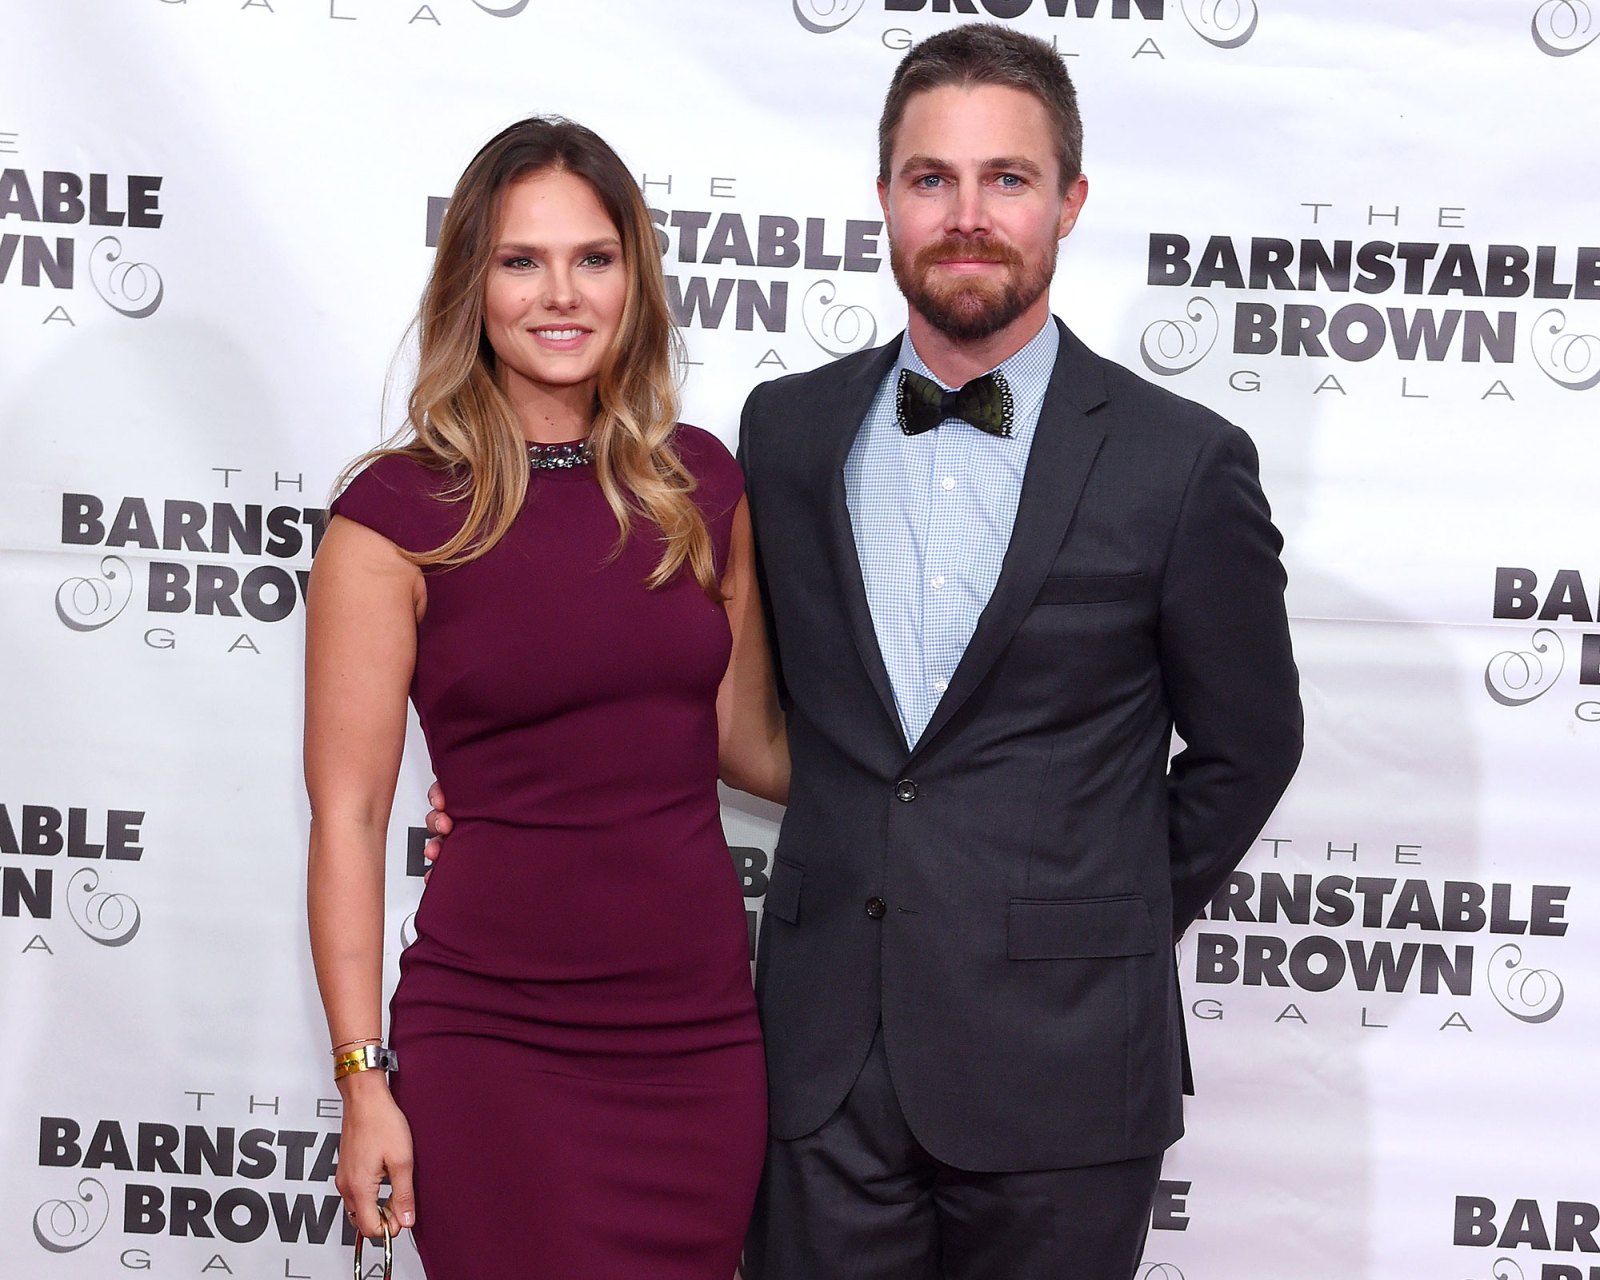 Stephen Amell Asked to Leave Flight Following Fight With Wife Cassandra